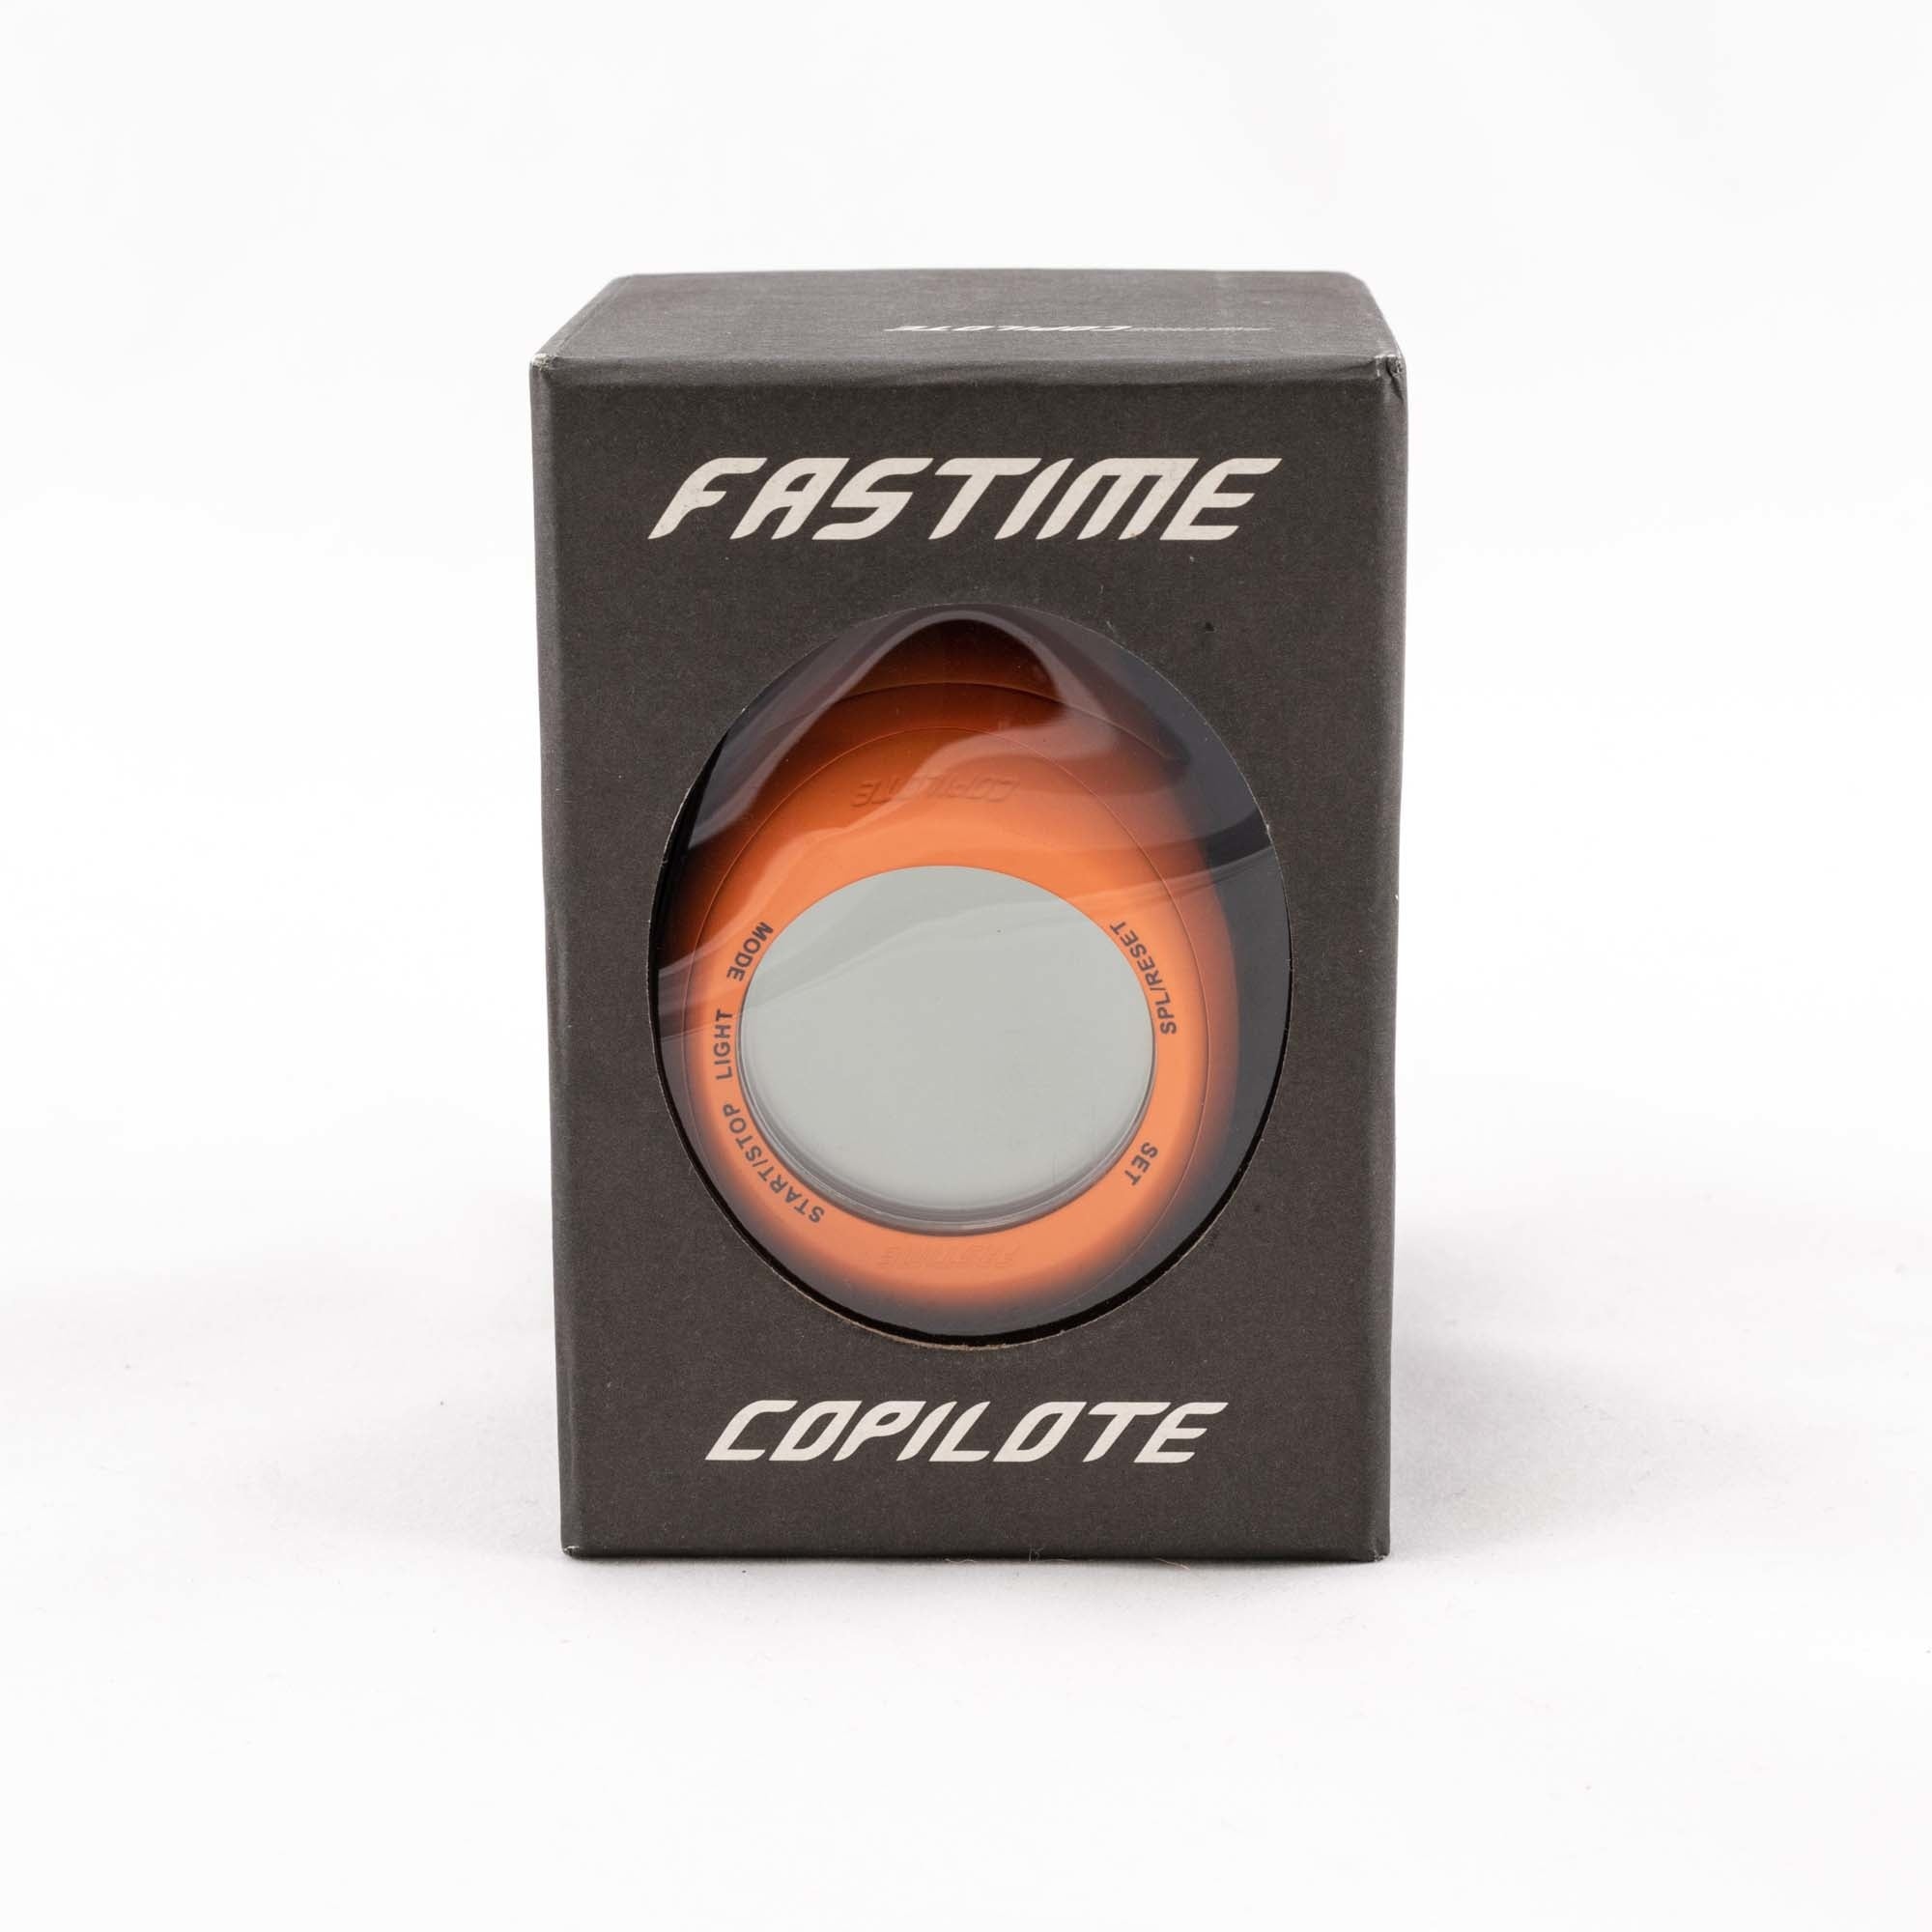 Fastime Copilote Rally Watch